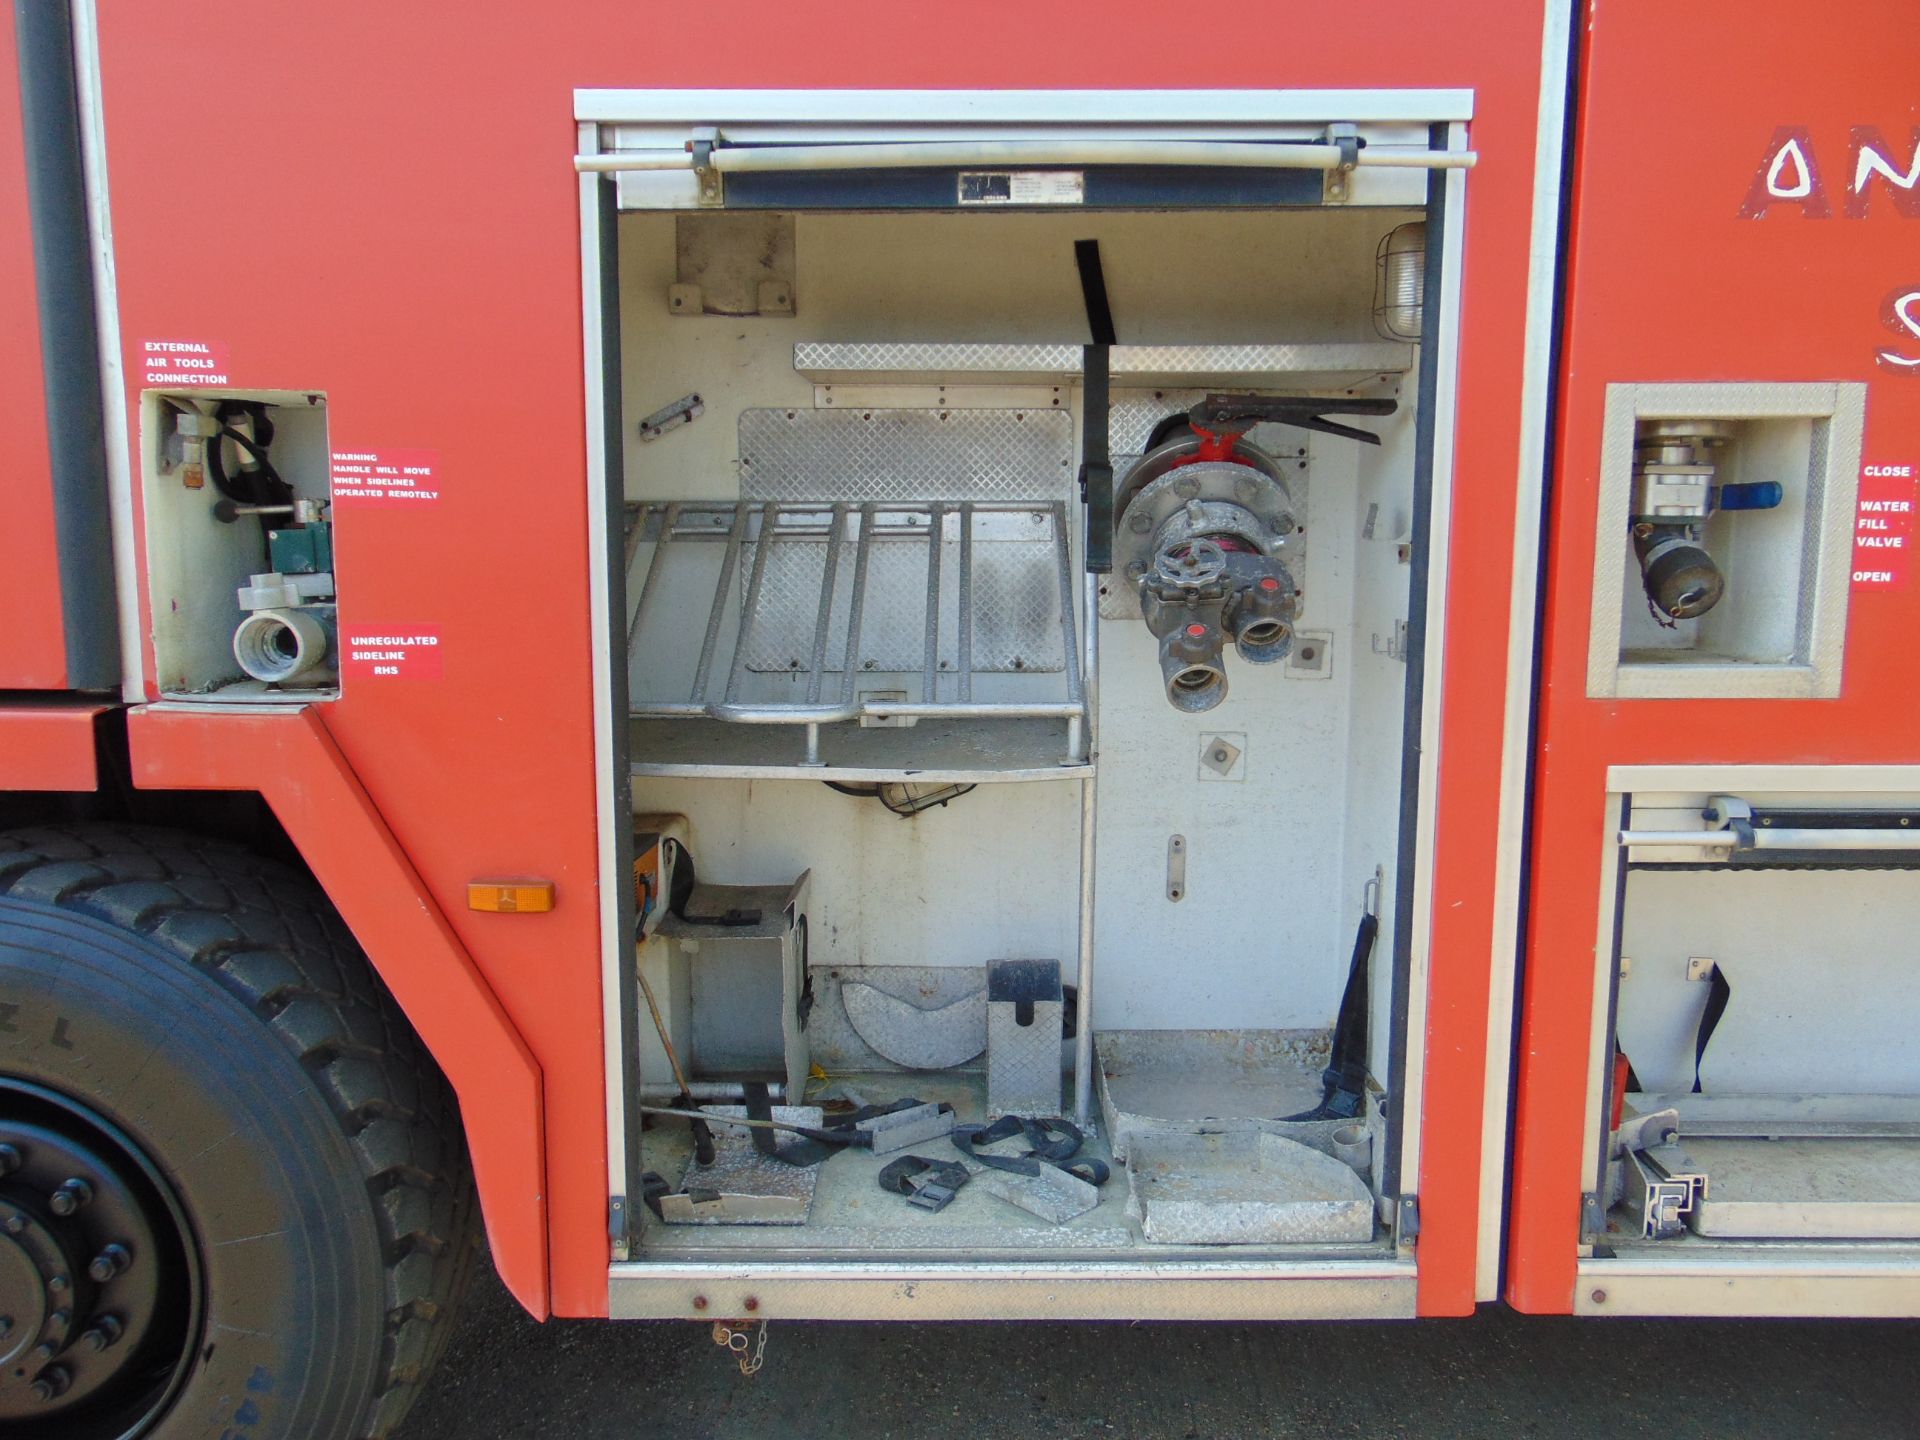 Unipower 4 x 4 Airport Fire Fighting Appliance - Rapid Intervention Vehicle - Image 29 of 73